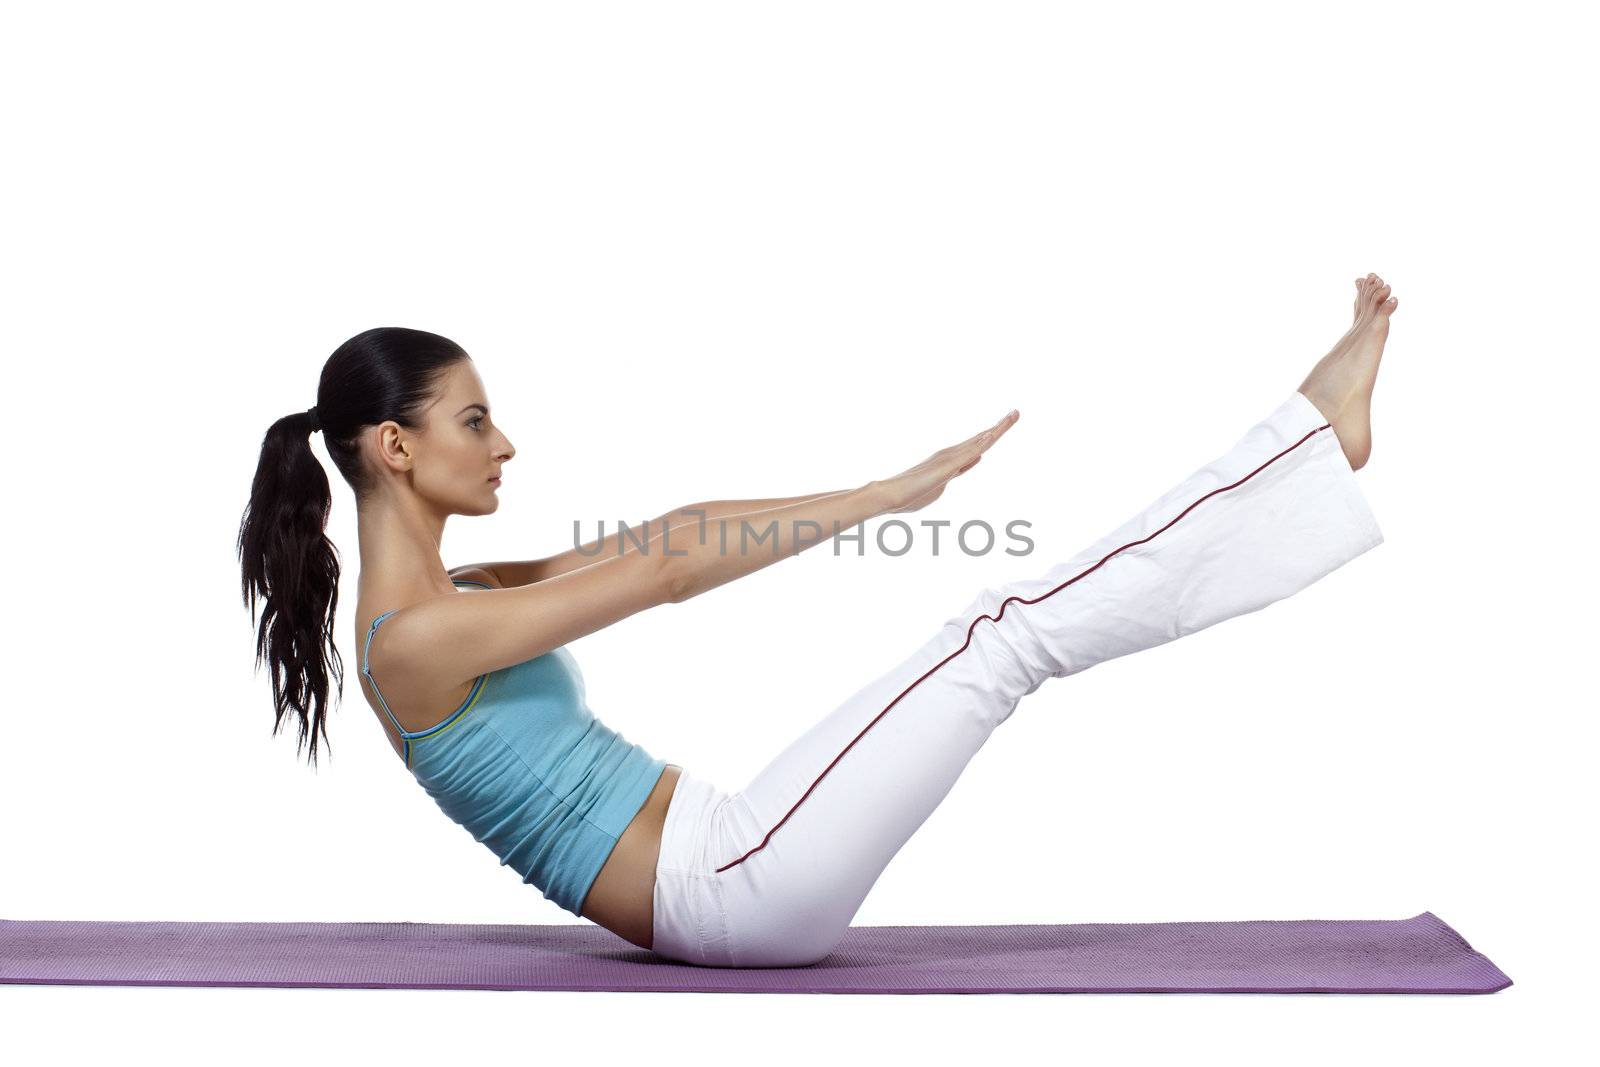 Horizontal image of a sporty woman stretching her legs and arms while lying on the mat